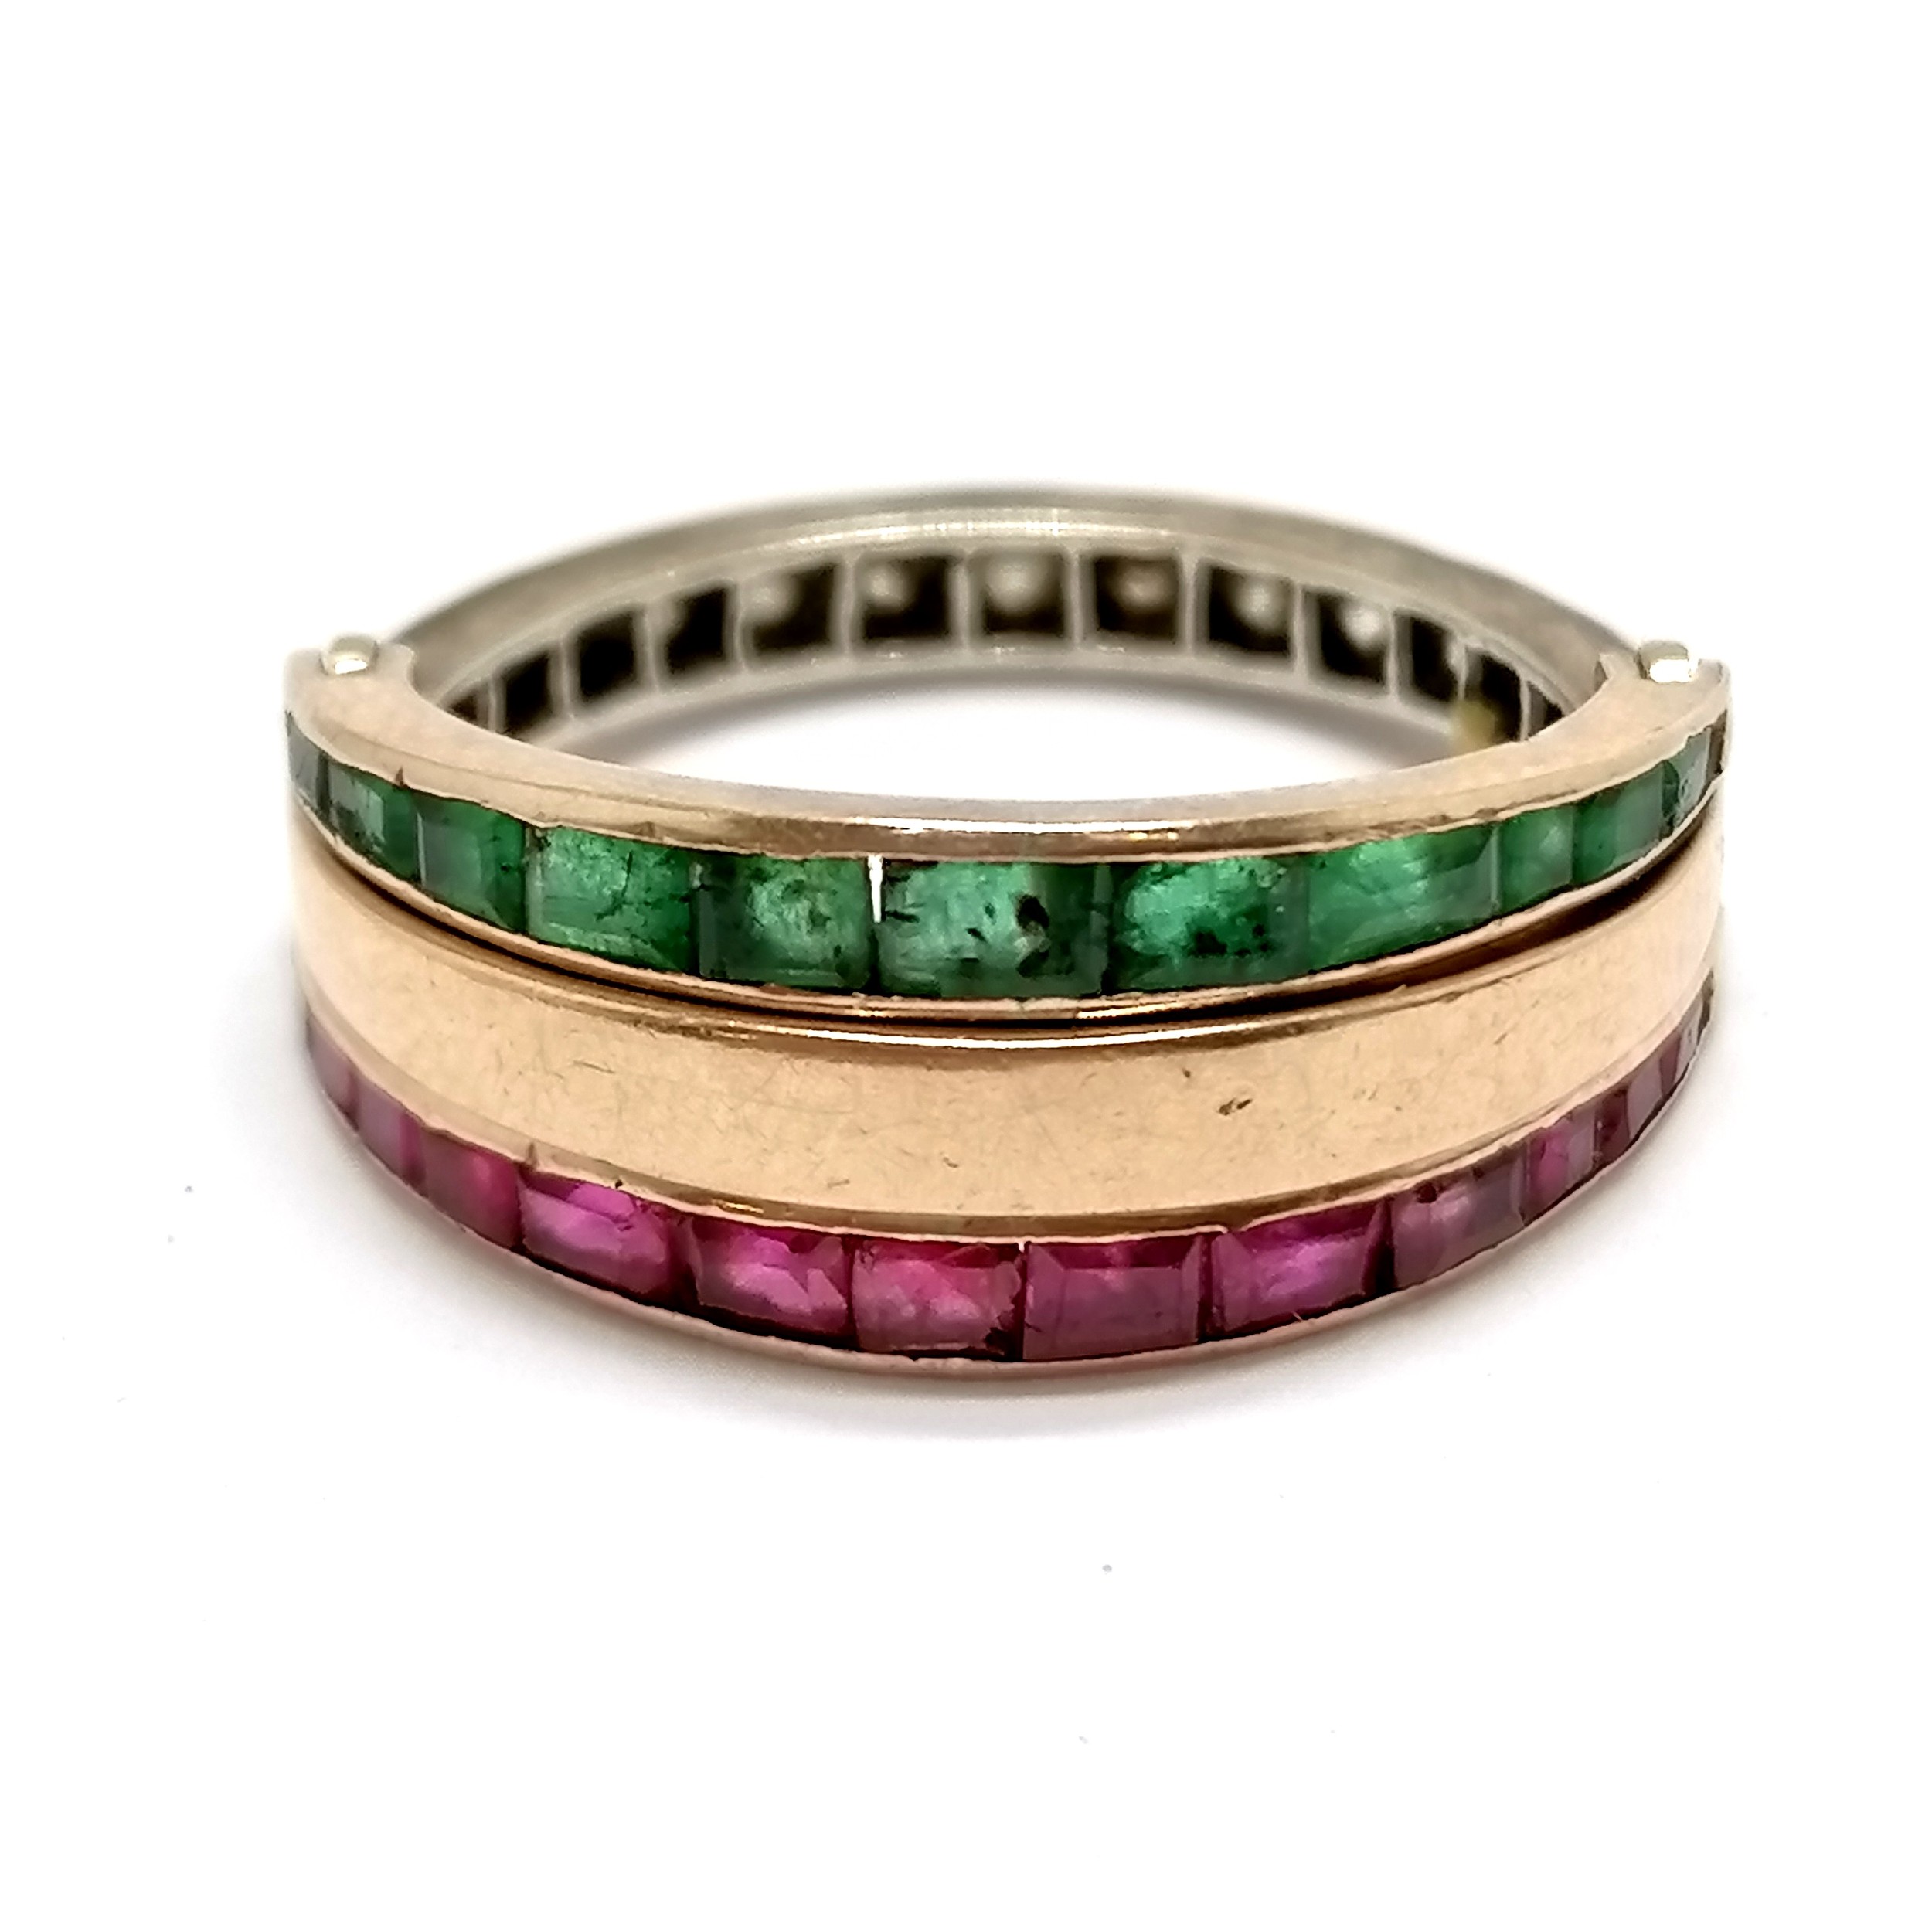 Unmarked gold reversible / flip over ring channel set with diamond / ruby / emerald - size R½ & 5.3g - Image 3 of 4